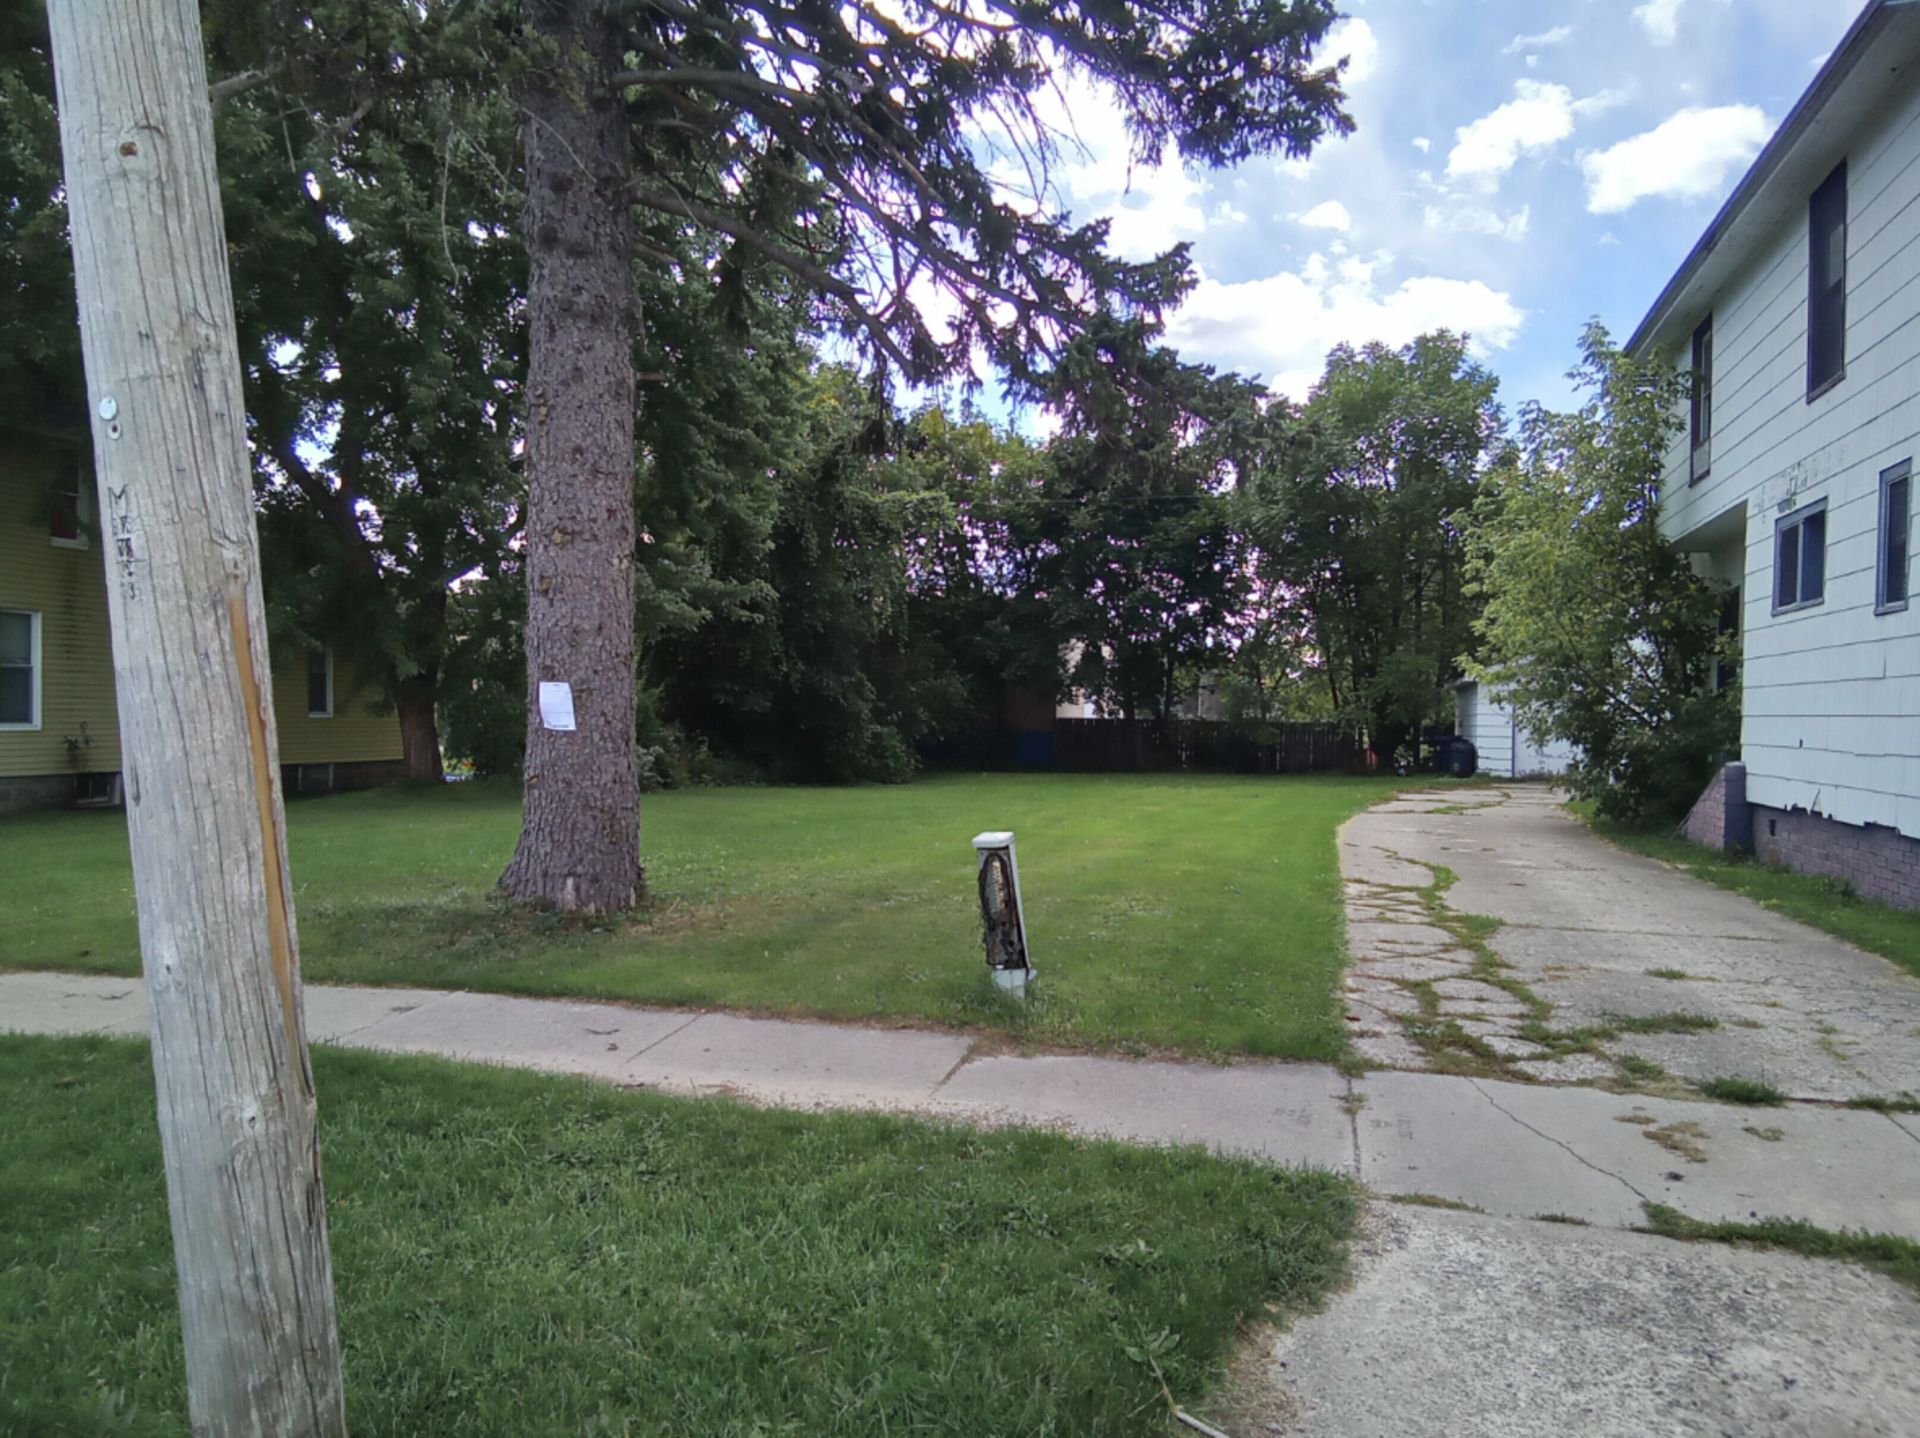 Prime Vacant Lot Walking Distance to the Saginaw River in Michigan! - Image 6 of 13